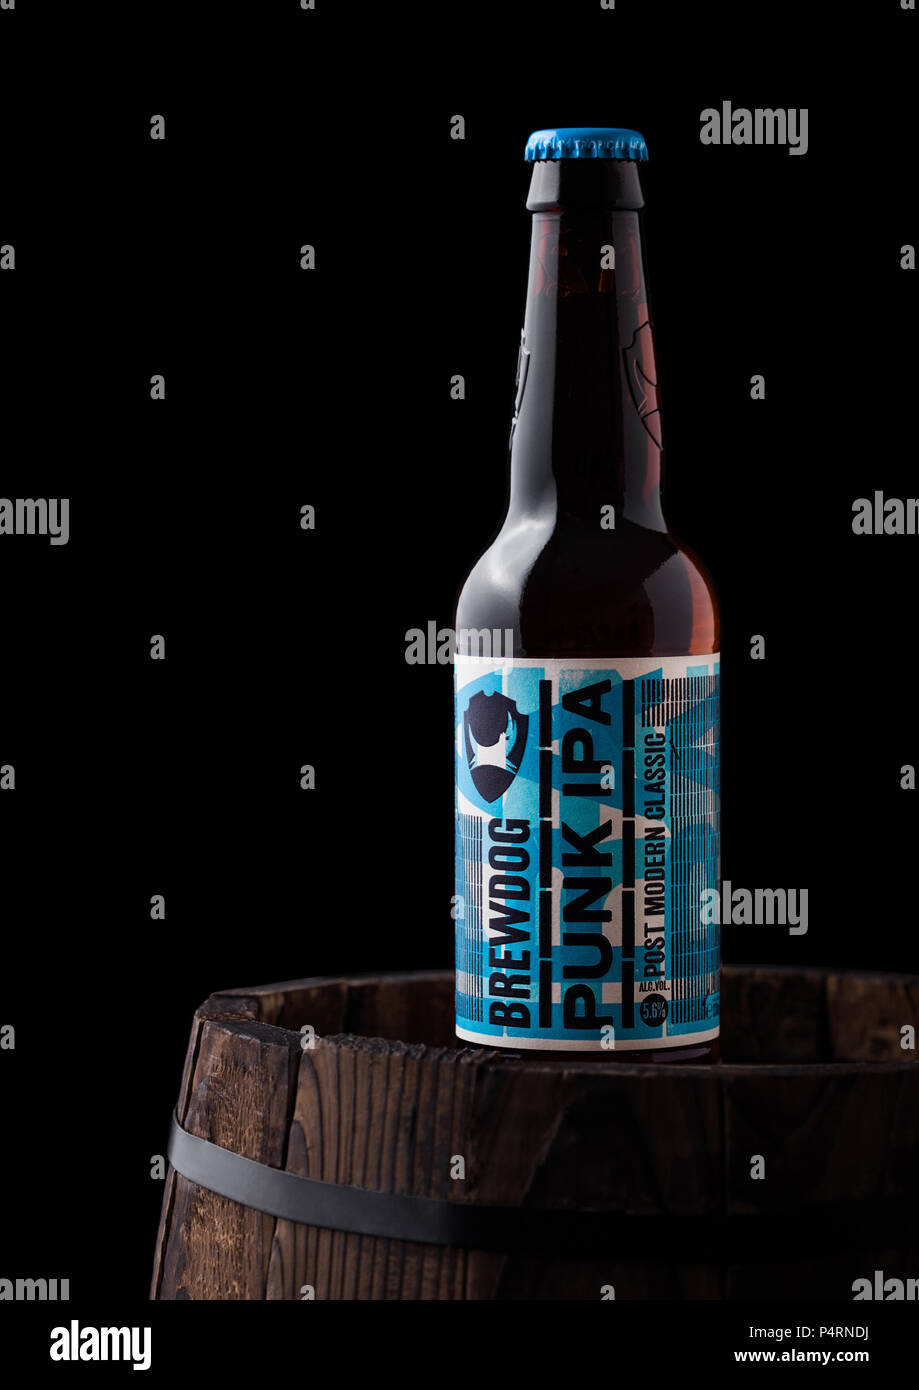 LONDON, UK - JUNE 06, 2018: Bottle of Punk IPA beer, from the Brewdog brewery on old wooden barrel on black background. Stock Photo